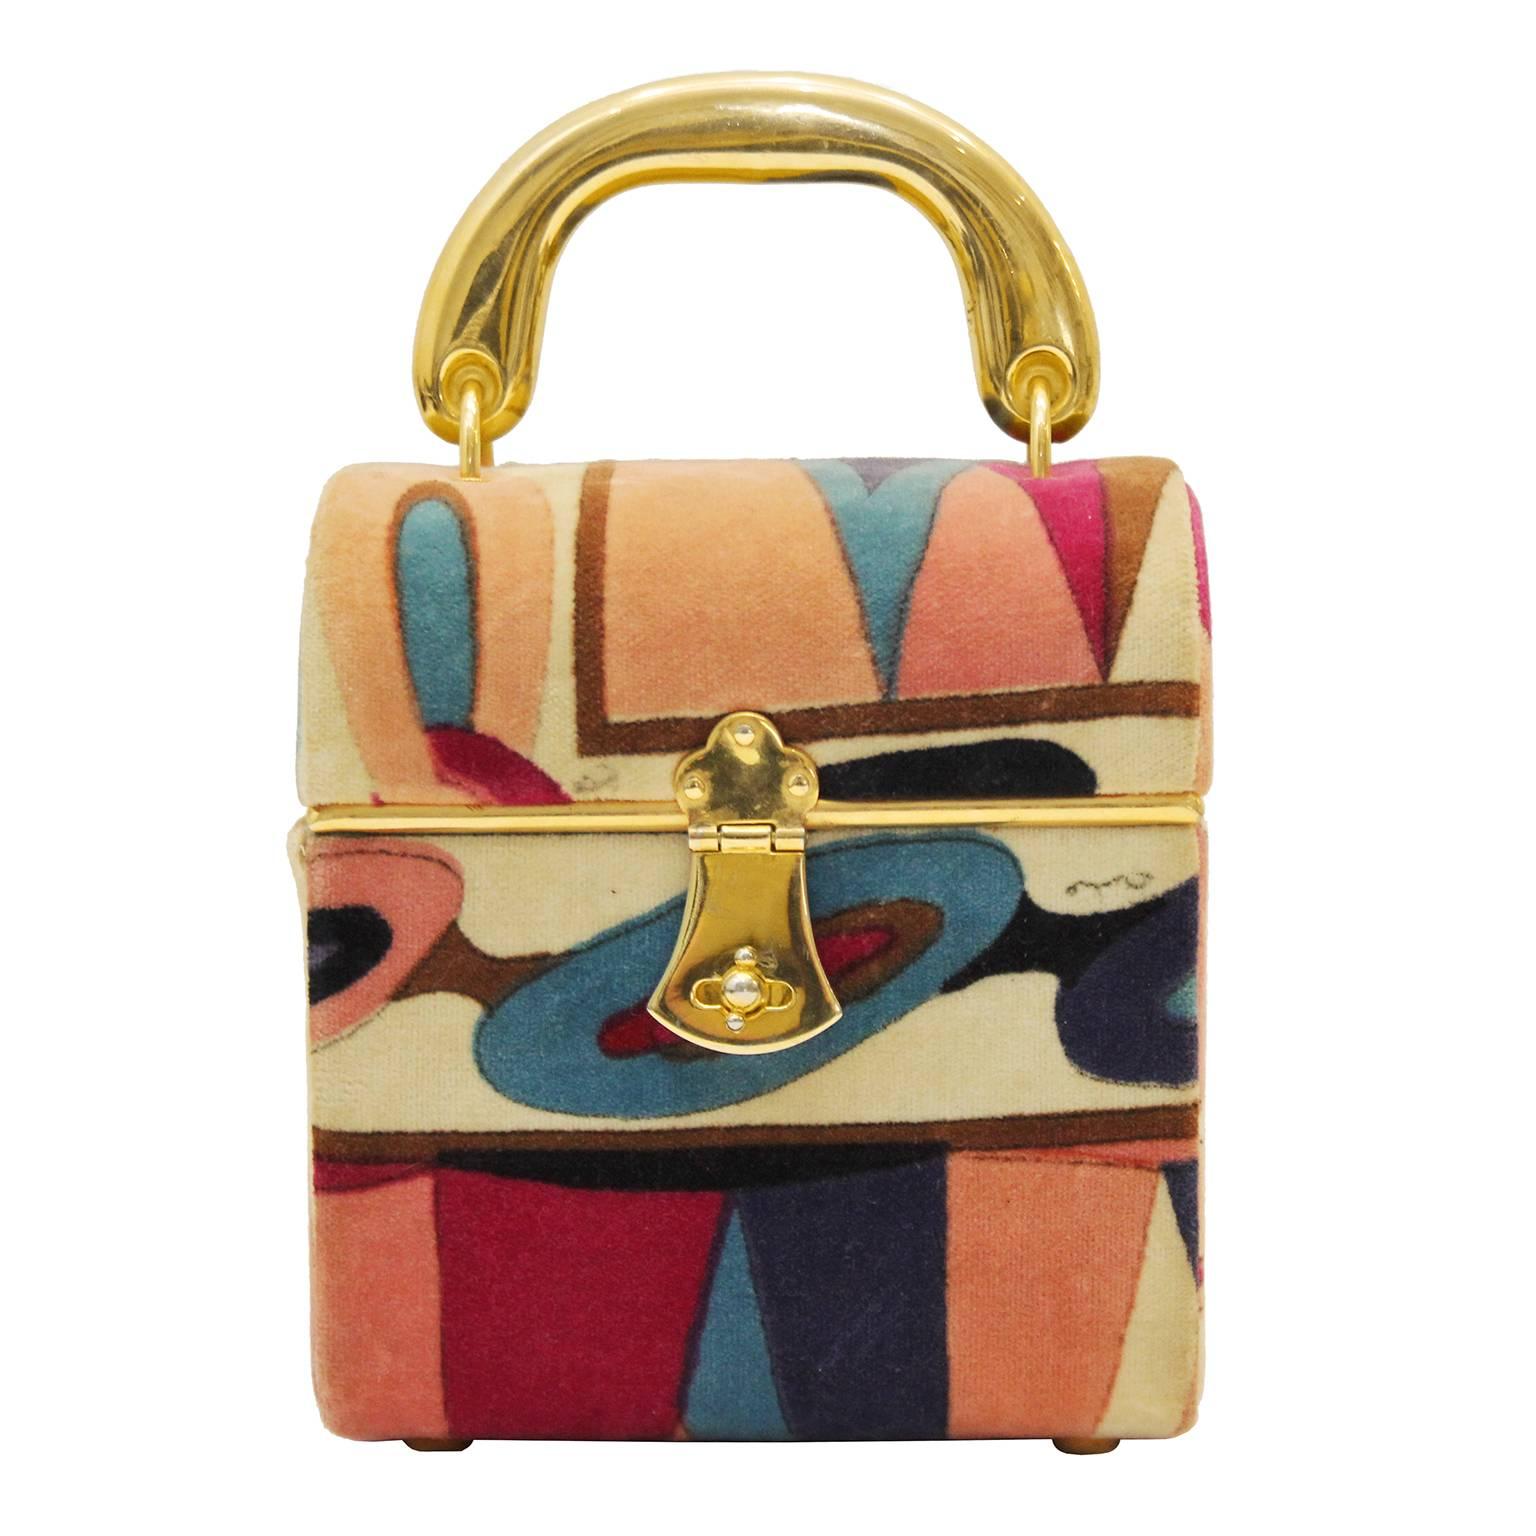 Beautiful petite 1970's Emilio Pucci velvet pink and purple printed hard case box style hand bag with a gold top handle and kiss lock closure. Lined in dark pink leather with one interior pocket. The exterior is in excellent vintage condition with